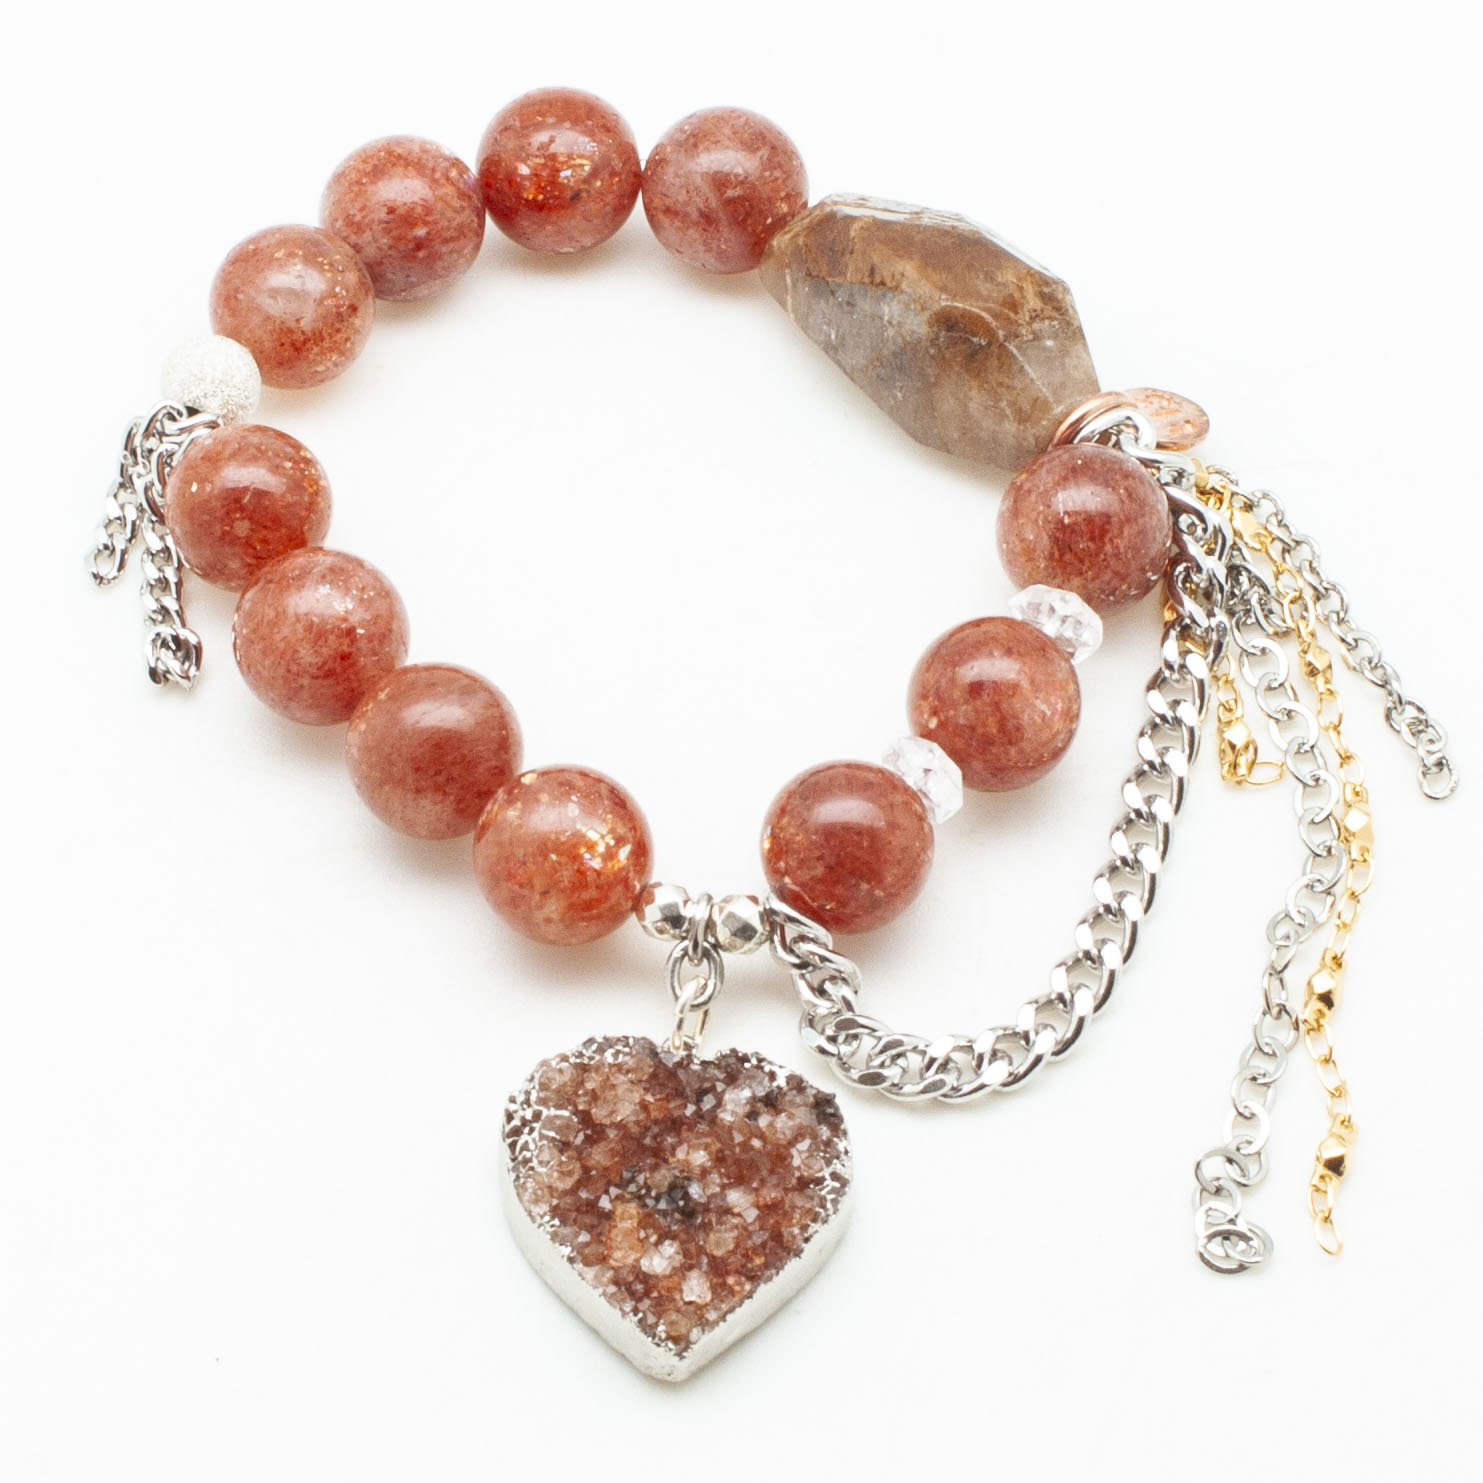 Sunstone with a Citrine Heart